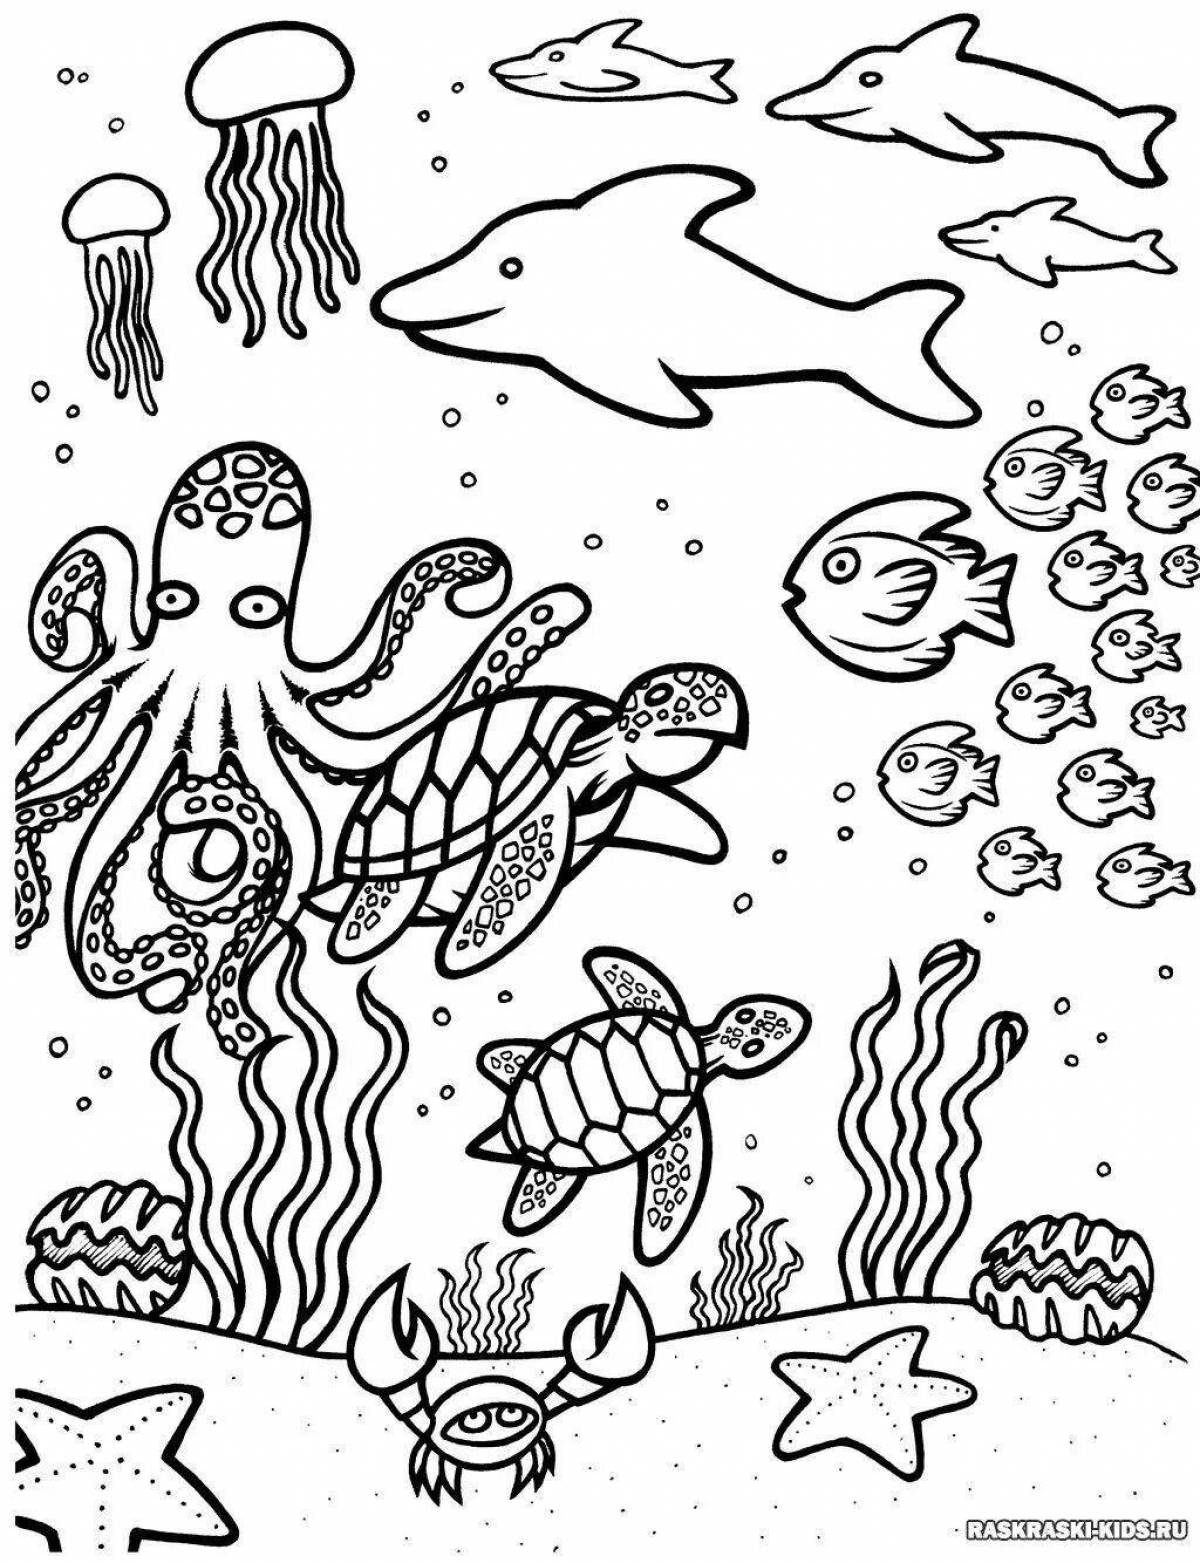 Animated large water coloring page